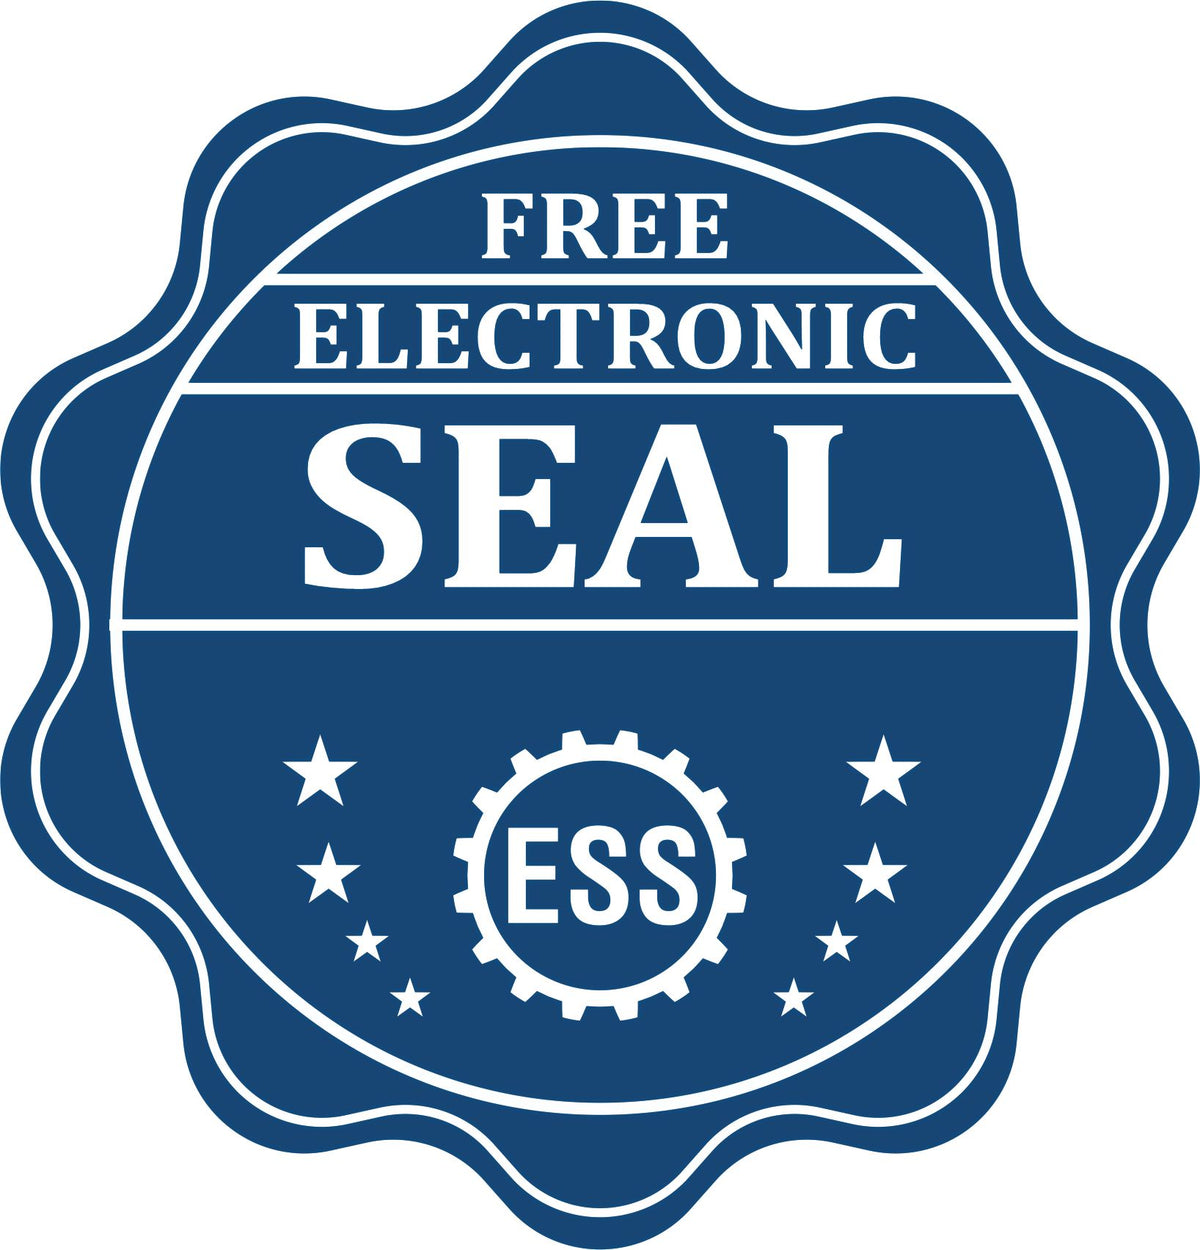 A badge showing a free electronic seal for the Extended Long Reach Colorado Surveyor Embosser with stars and the ESS gear on the emblem.